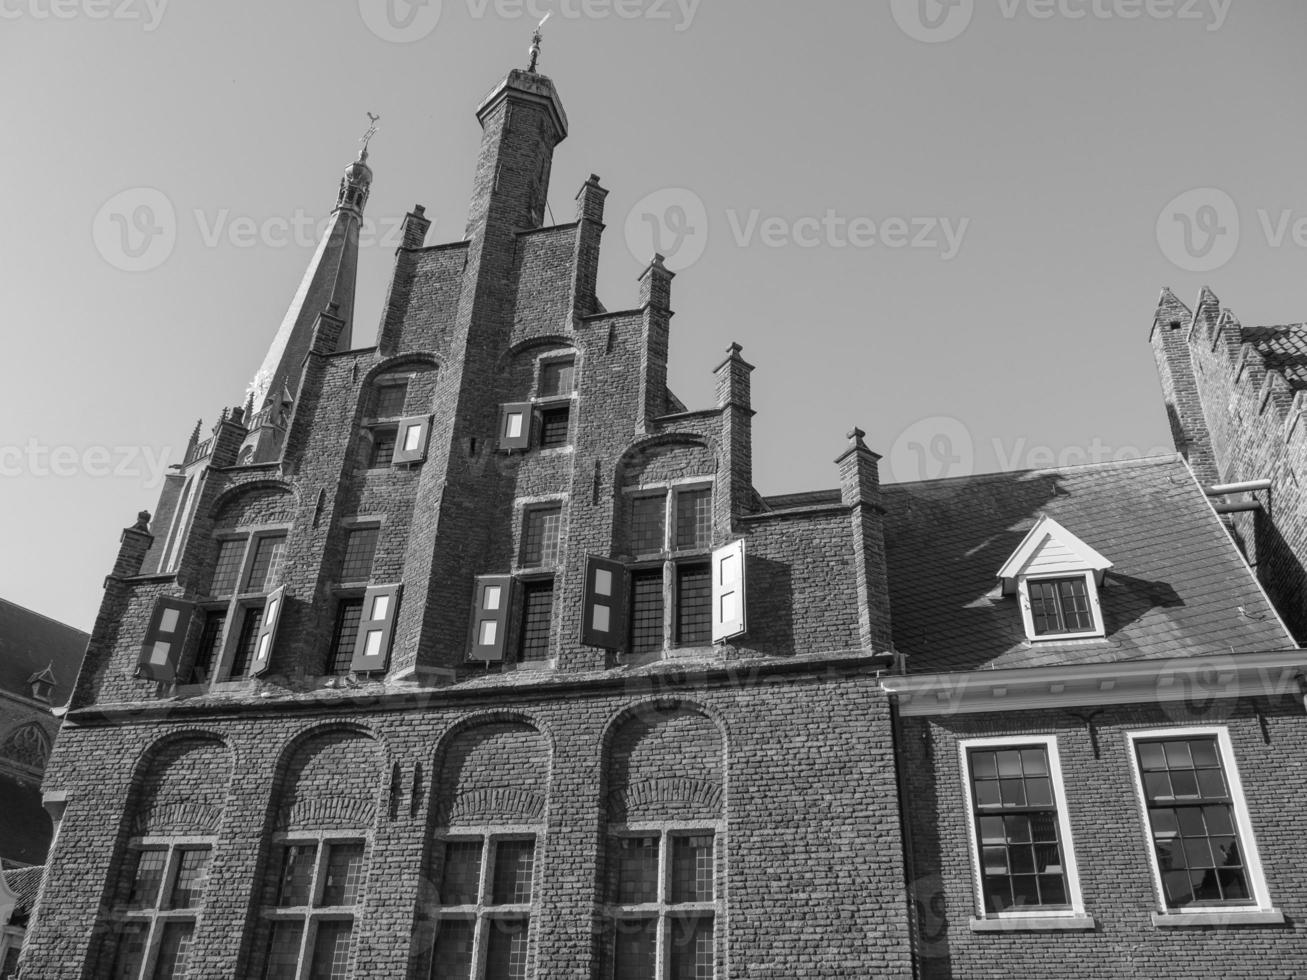 Doesburg in the netherlands photo